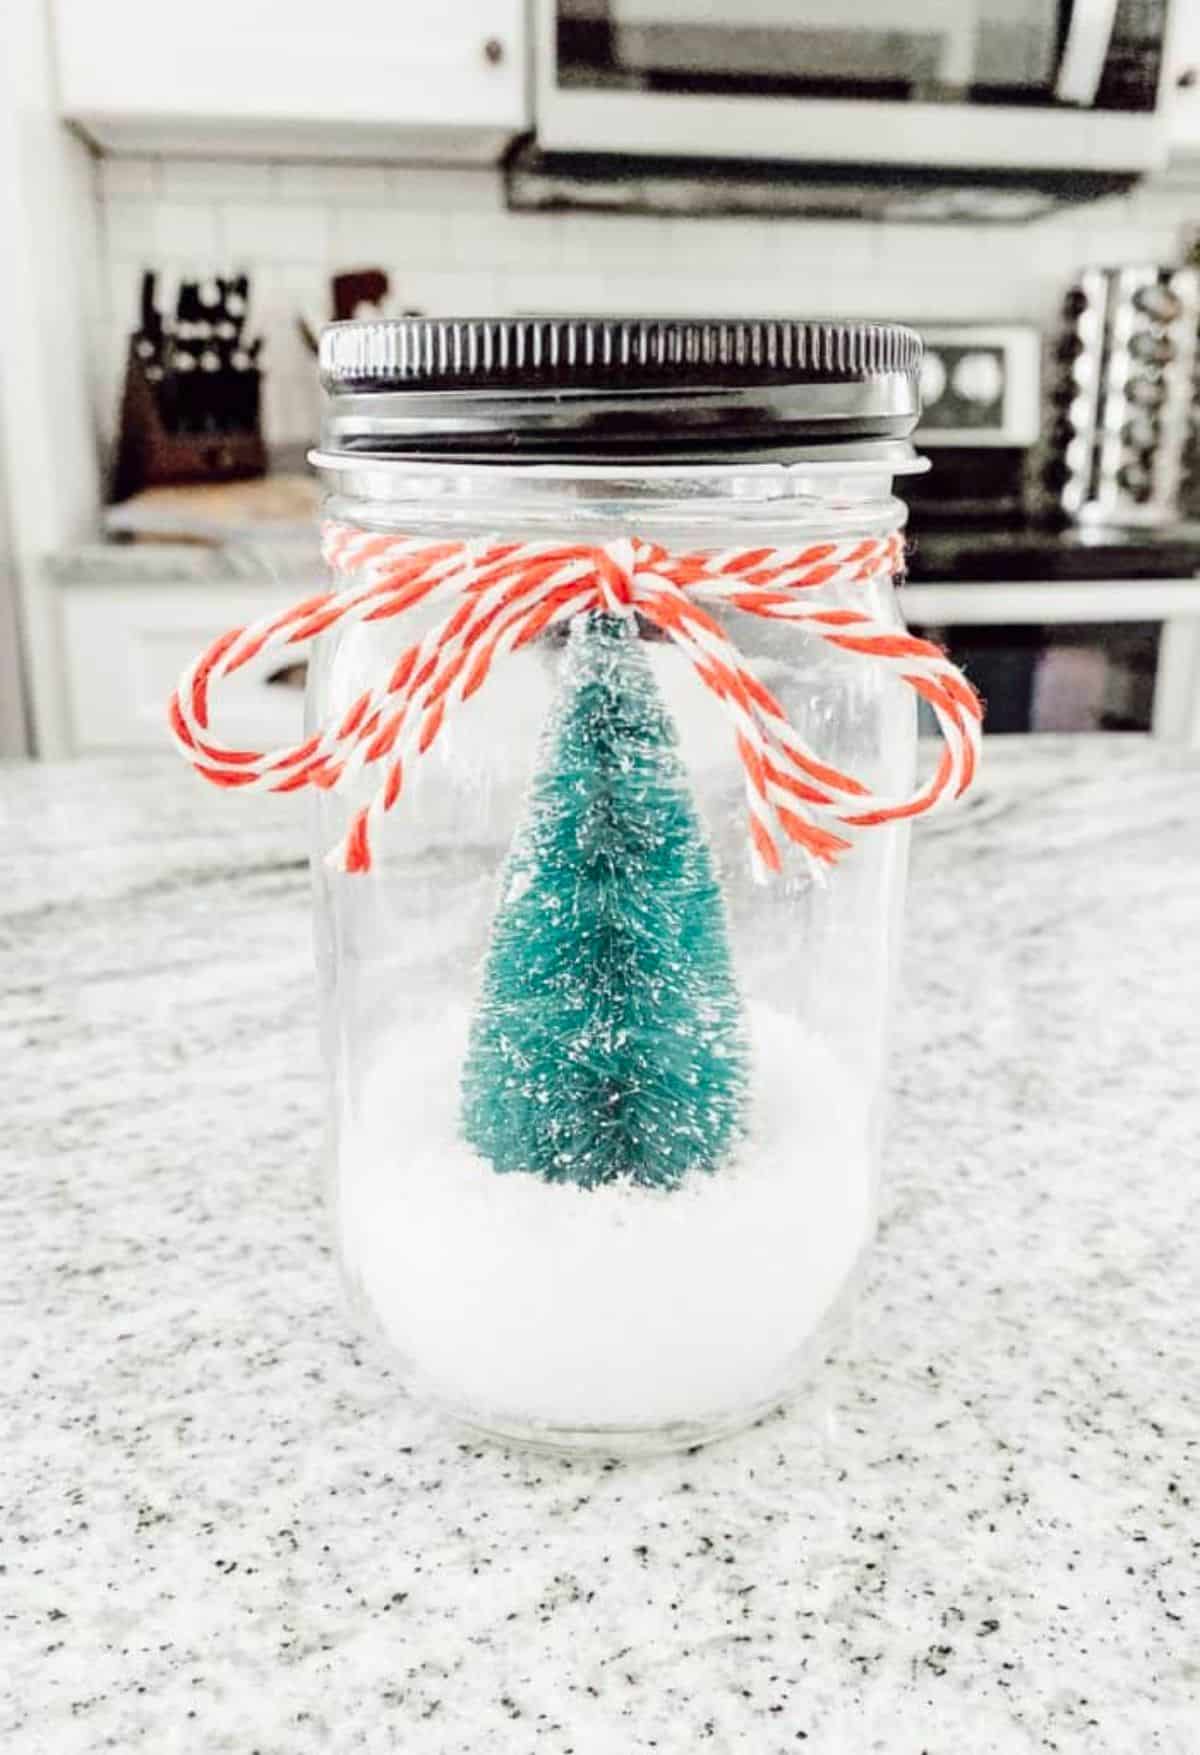 A candle jar repurposed as a snow globe.